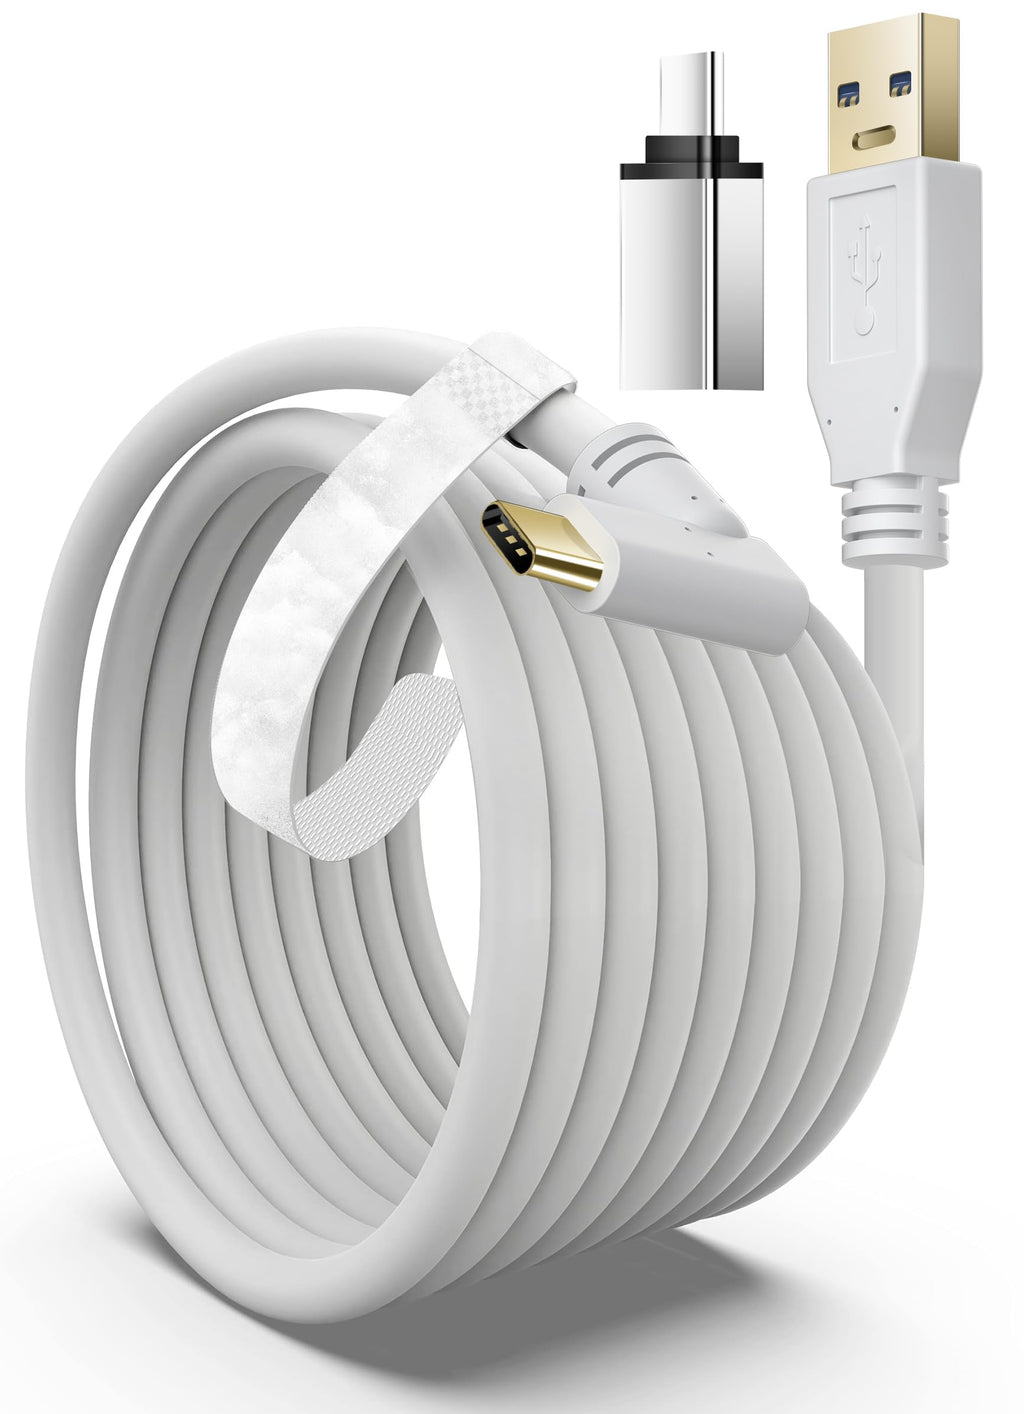  [AUSTRALIA] - AICaes VR Cable 9.8 FT for Oculus Quest 3/2/1/Pico 4 Accessories/Rift S/PC/Steam VR,VR Headset Cable Link Cable 2 in 1 USB 3.0 Type C to C High Speed Data Transfer Charging Cord for Gaming PC